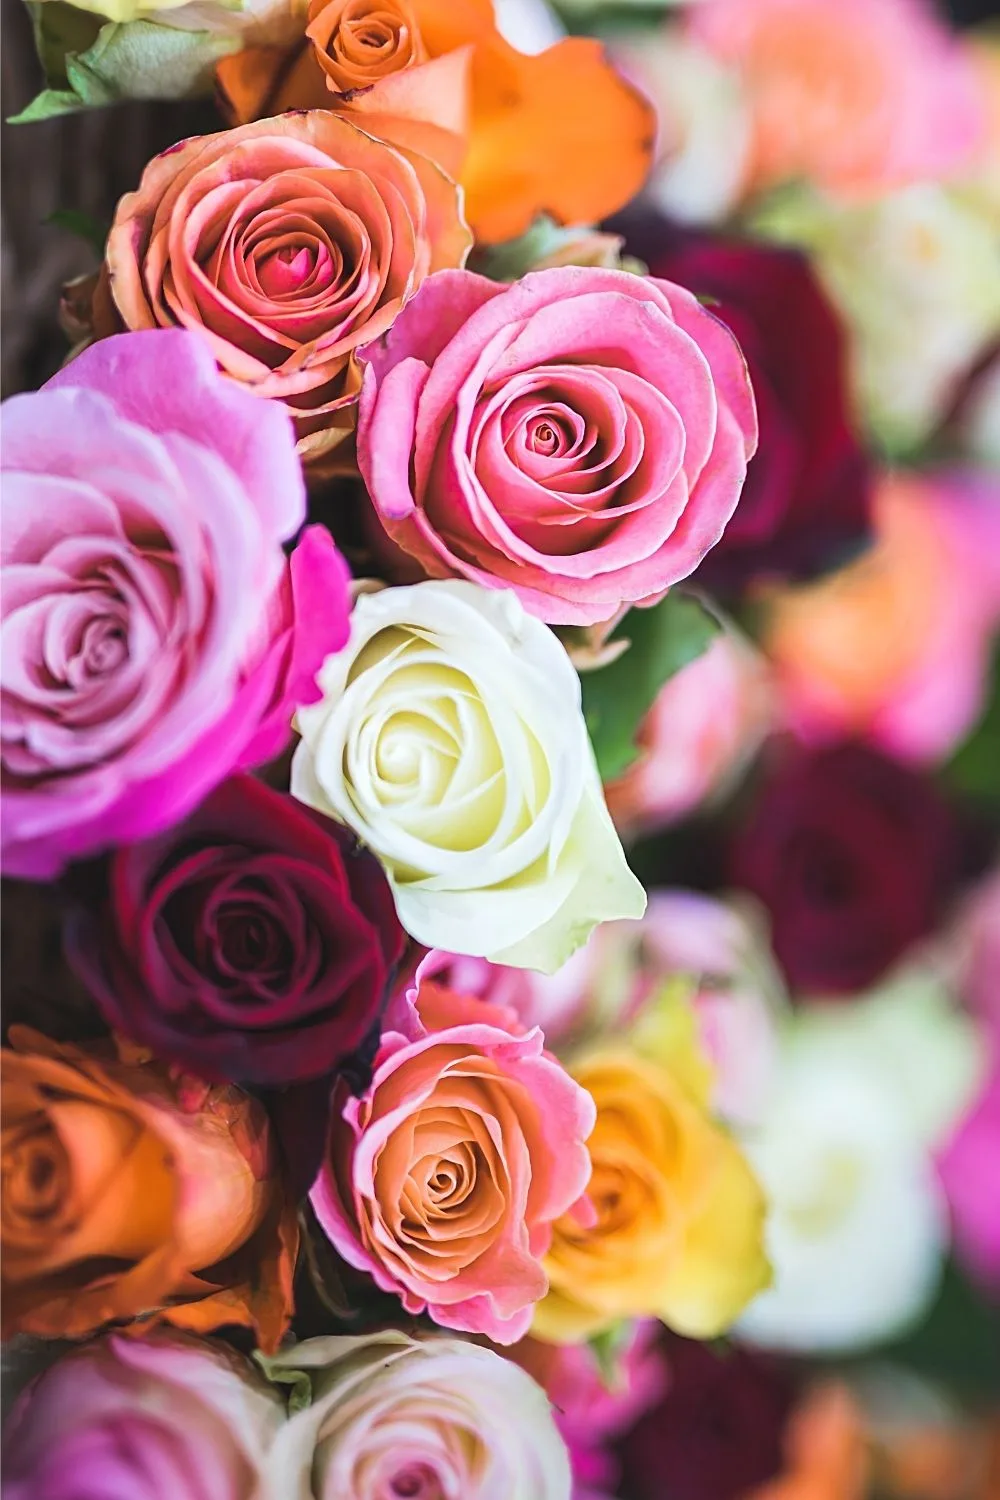 Roses are prominent flowers that are known to evoke a feeling of love and can add beauty to your south-facing balcony